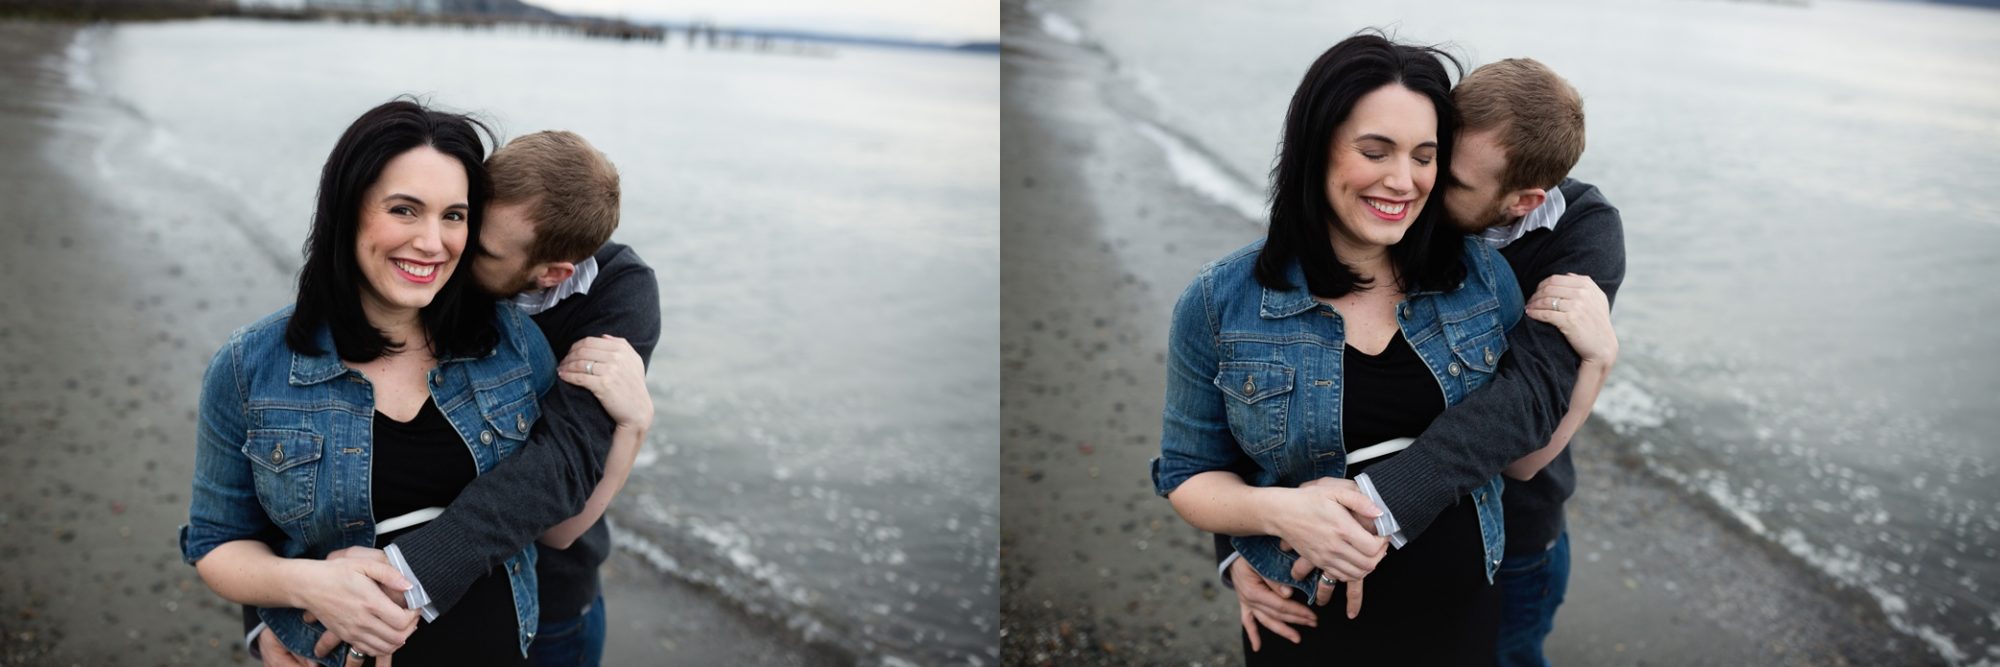 tacoma maternity session | puyallup maternity photographer | seattle pregnancy photos